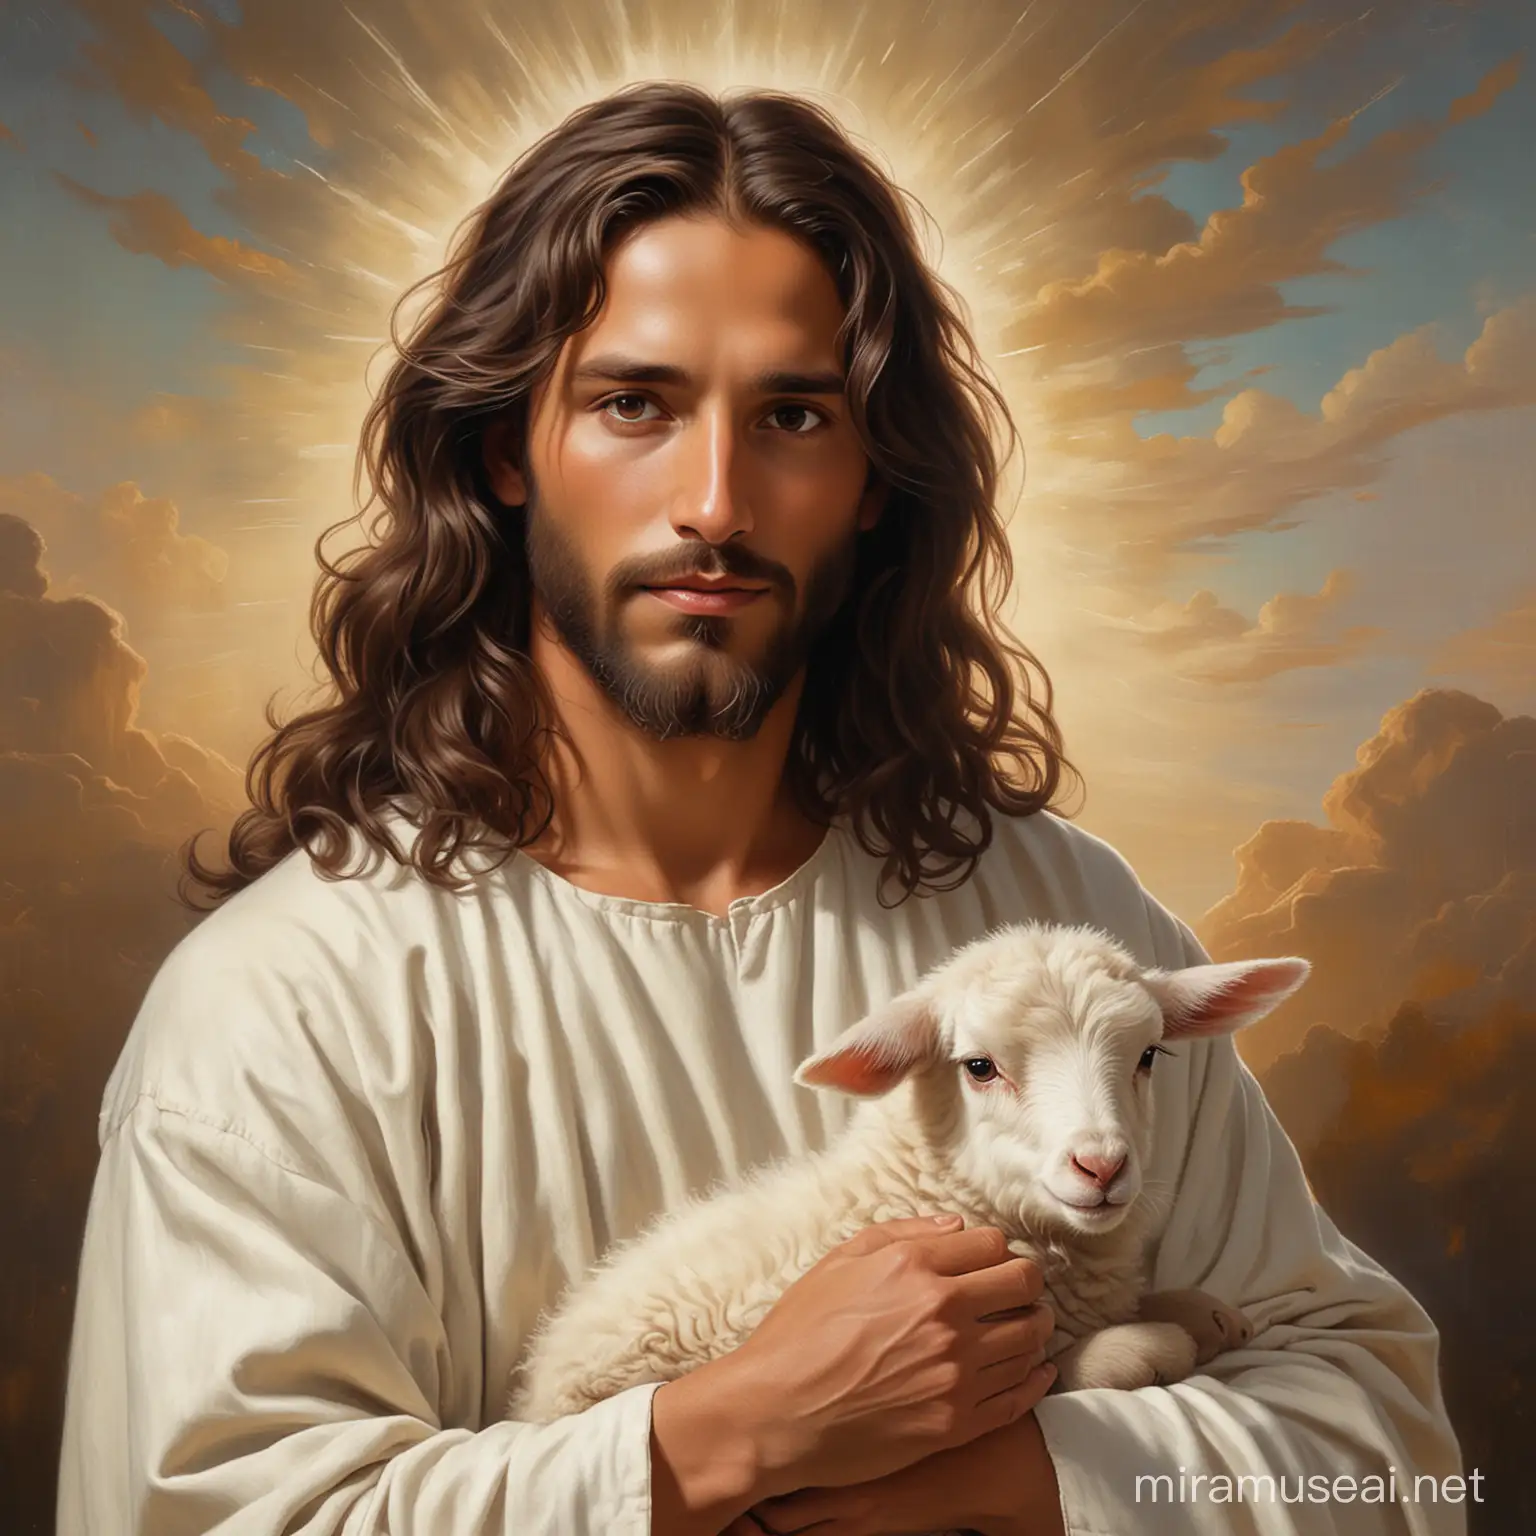 A PAINTING OF JESUS, WITH LONG, DARK BROWN WAVY HAIR AND BROWN EYES, HOLDING A LAMB